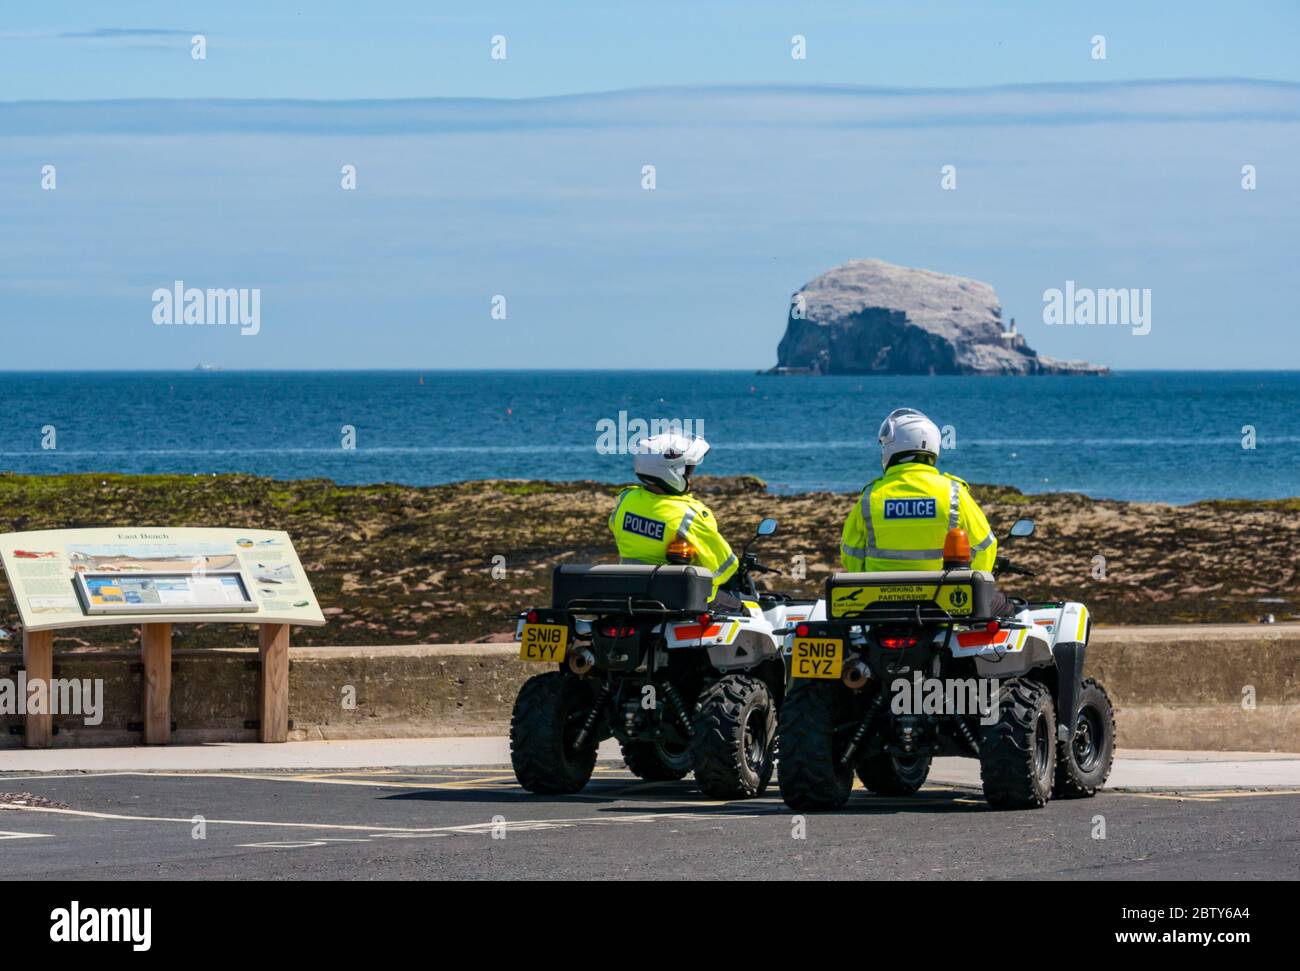 North Berwick, East Lothian, Scotland, United Kingdom, 28th May 2020. Easing of lockdown restrictions: with the Scottish Government set to announce the lifting of some lockdown restrictions today, there are already signs that things are beginning to return to normal in the popular seaside town. Police on quad bikes patrol the beach during lockdown and pause for a rest stop in Milsey Bay with the Bass Rock gannet colony on the horizon on a sunny day Stock Photo